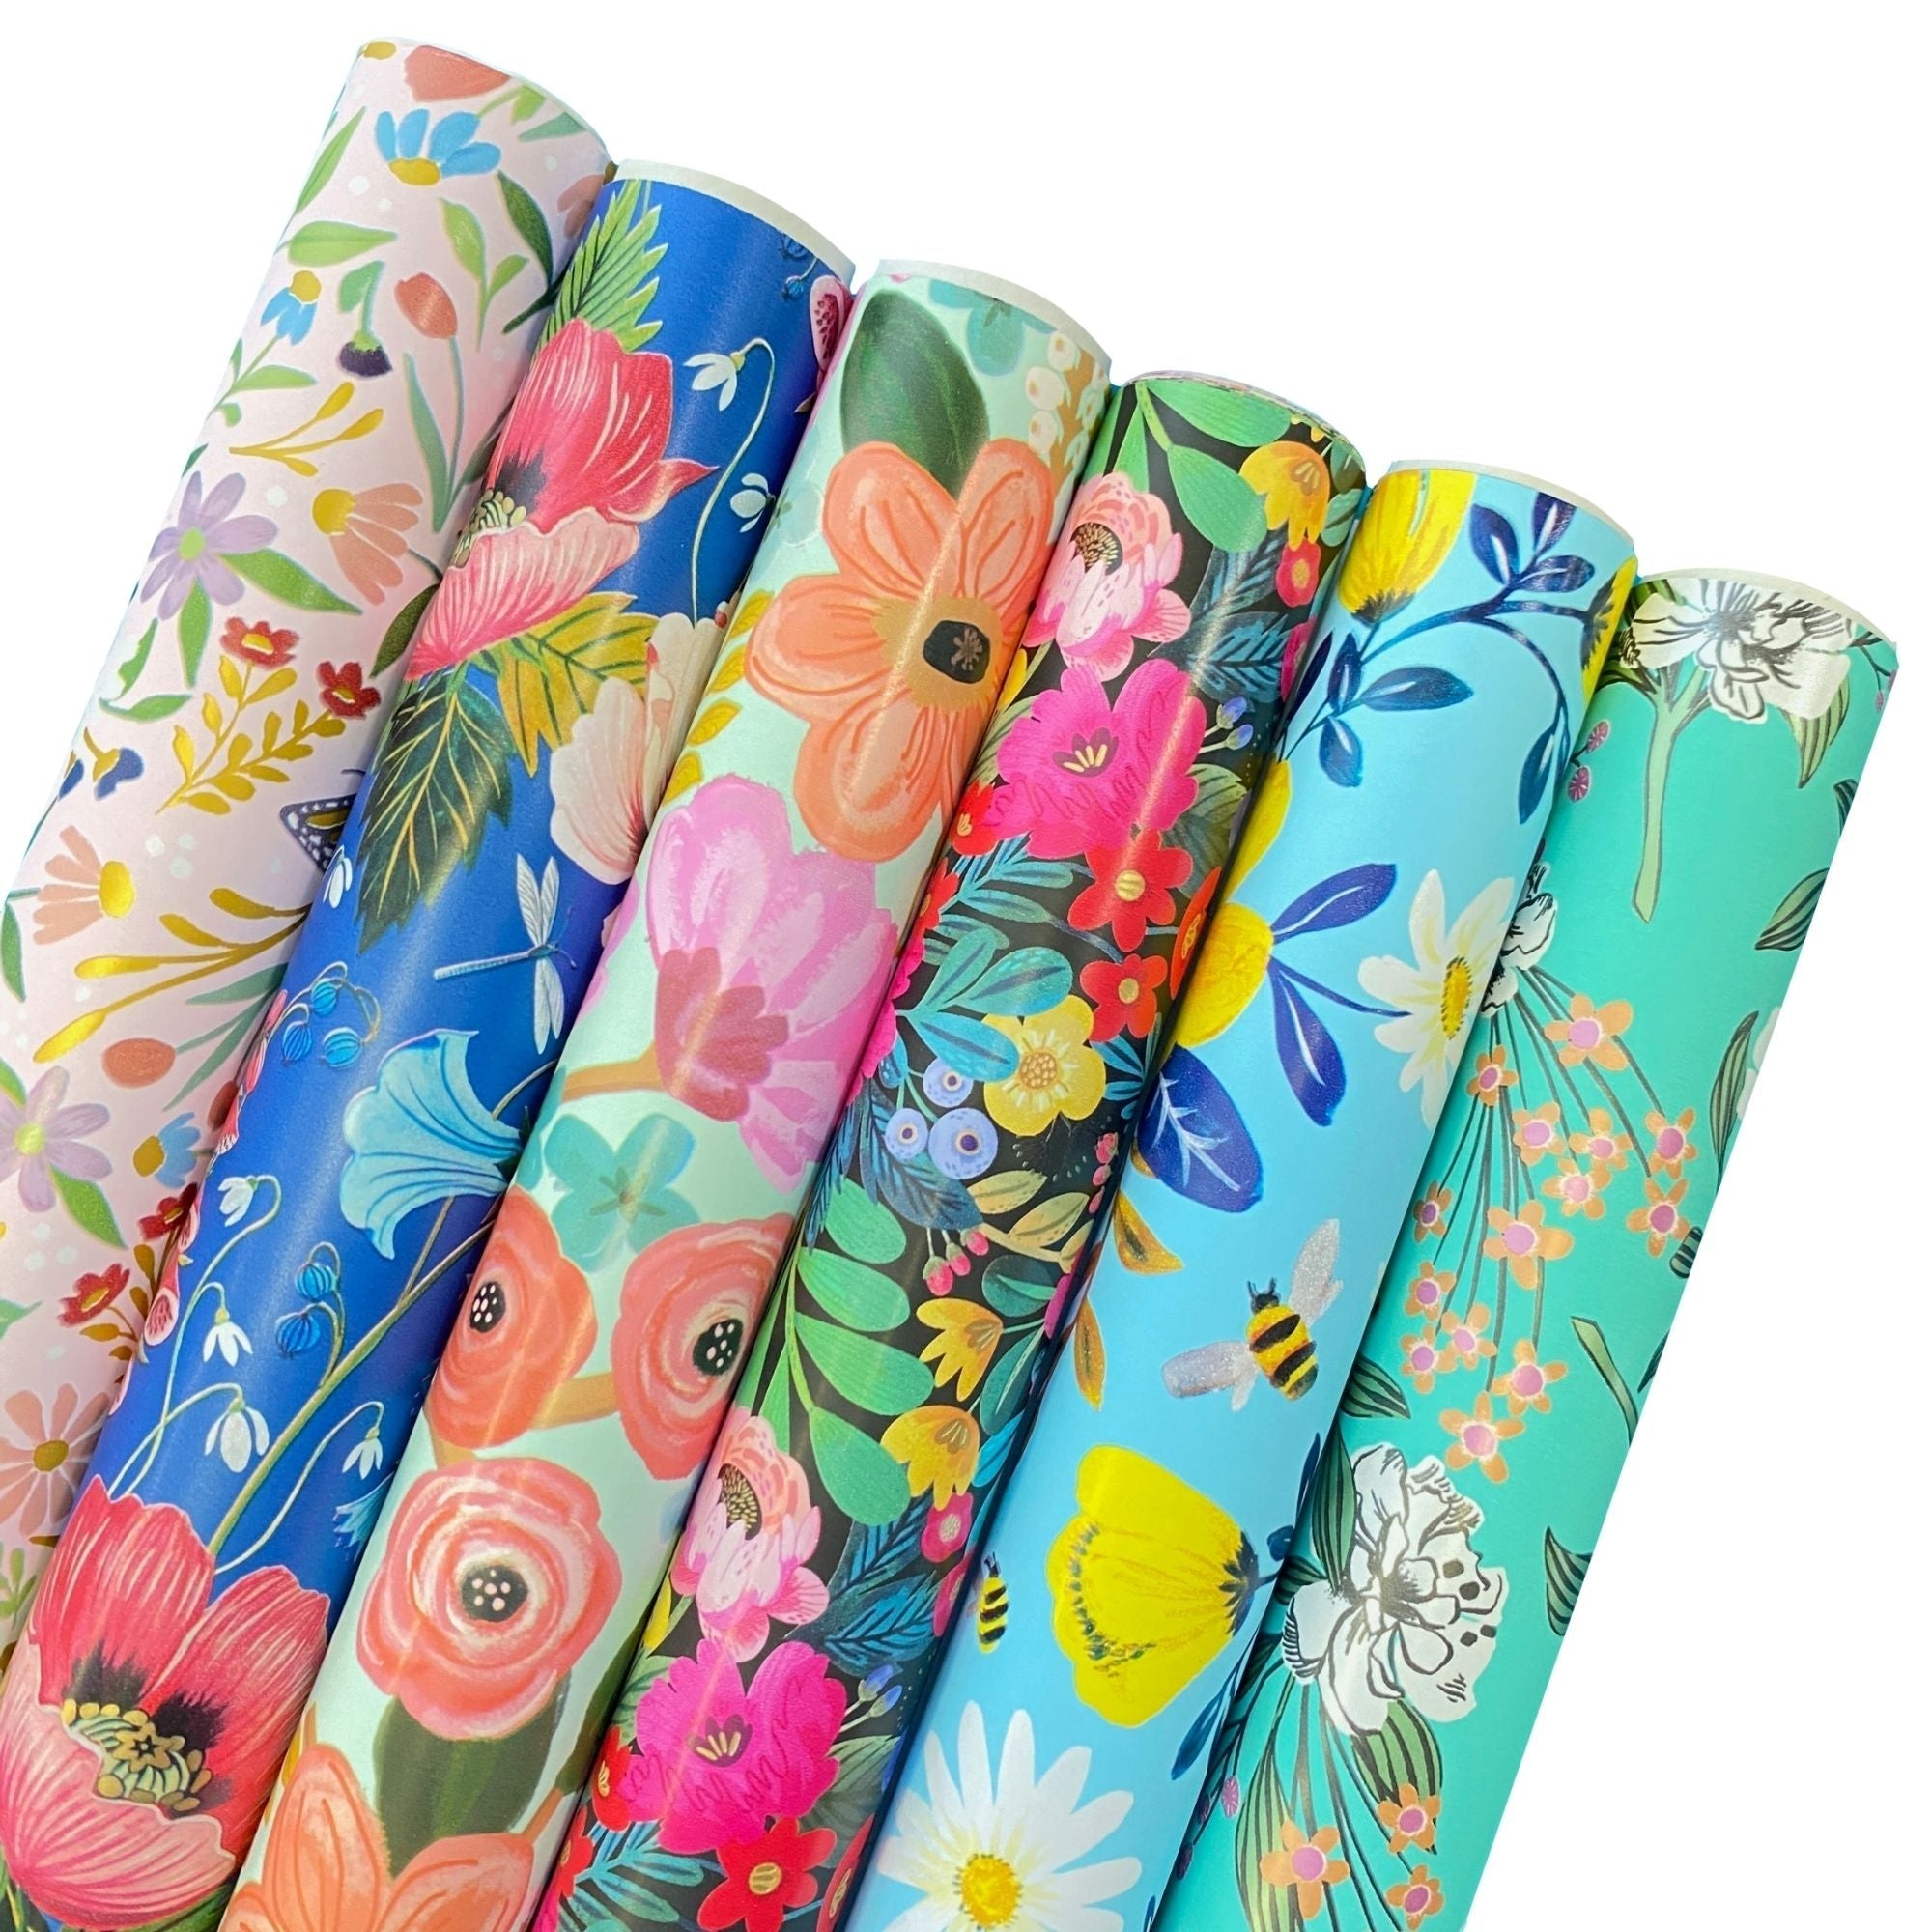 Floral Wrapping Paper Roll Bundle (12.5 sq ft per roll, 75 total sq ft), 6 Pack